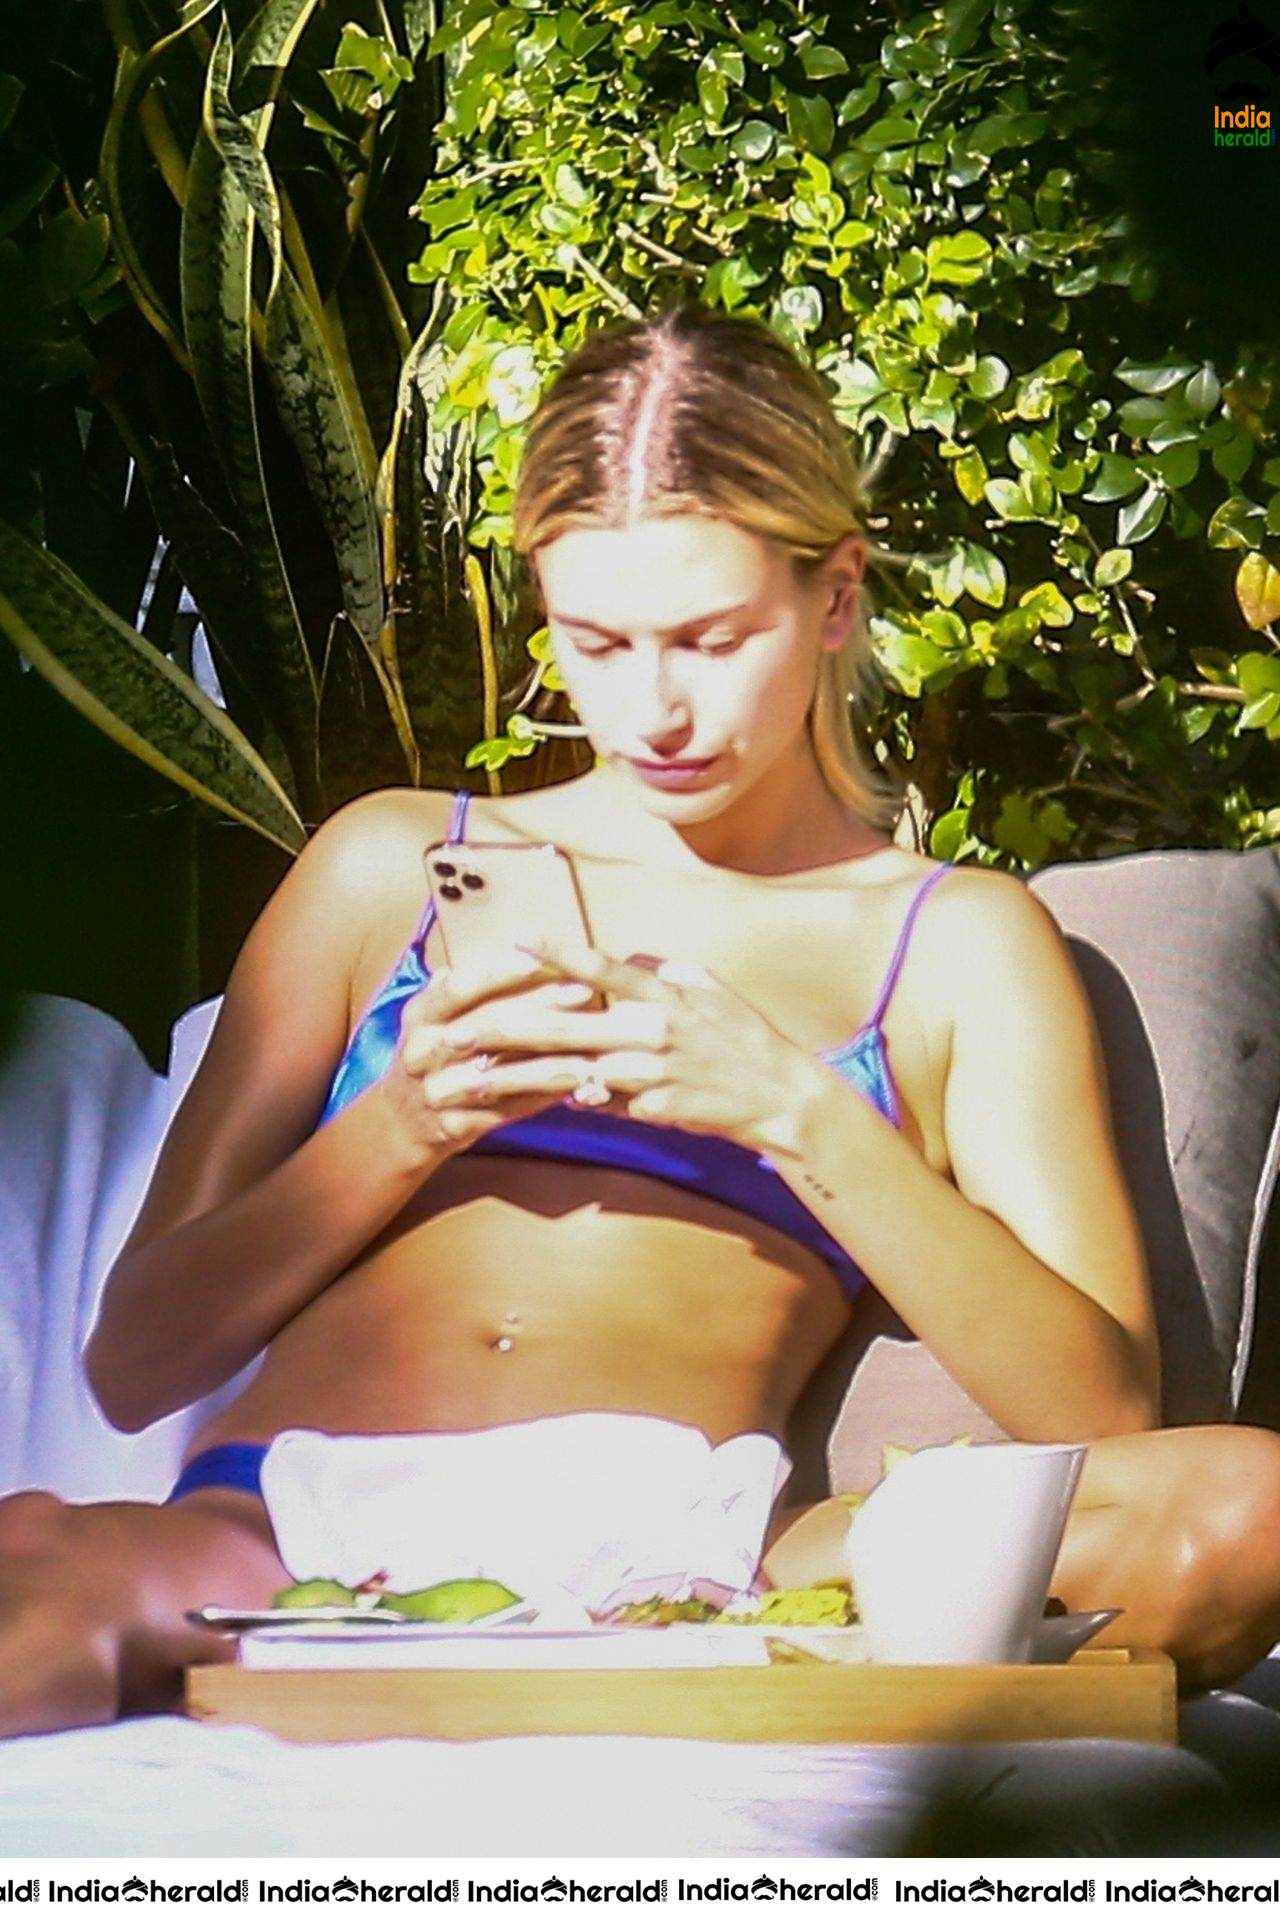 Hailey Bieber is enjoying some downtime by the pool in Miami